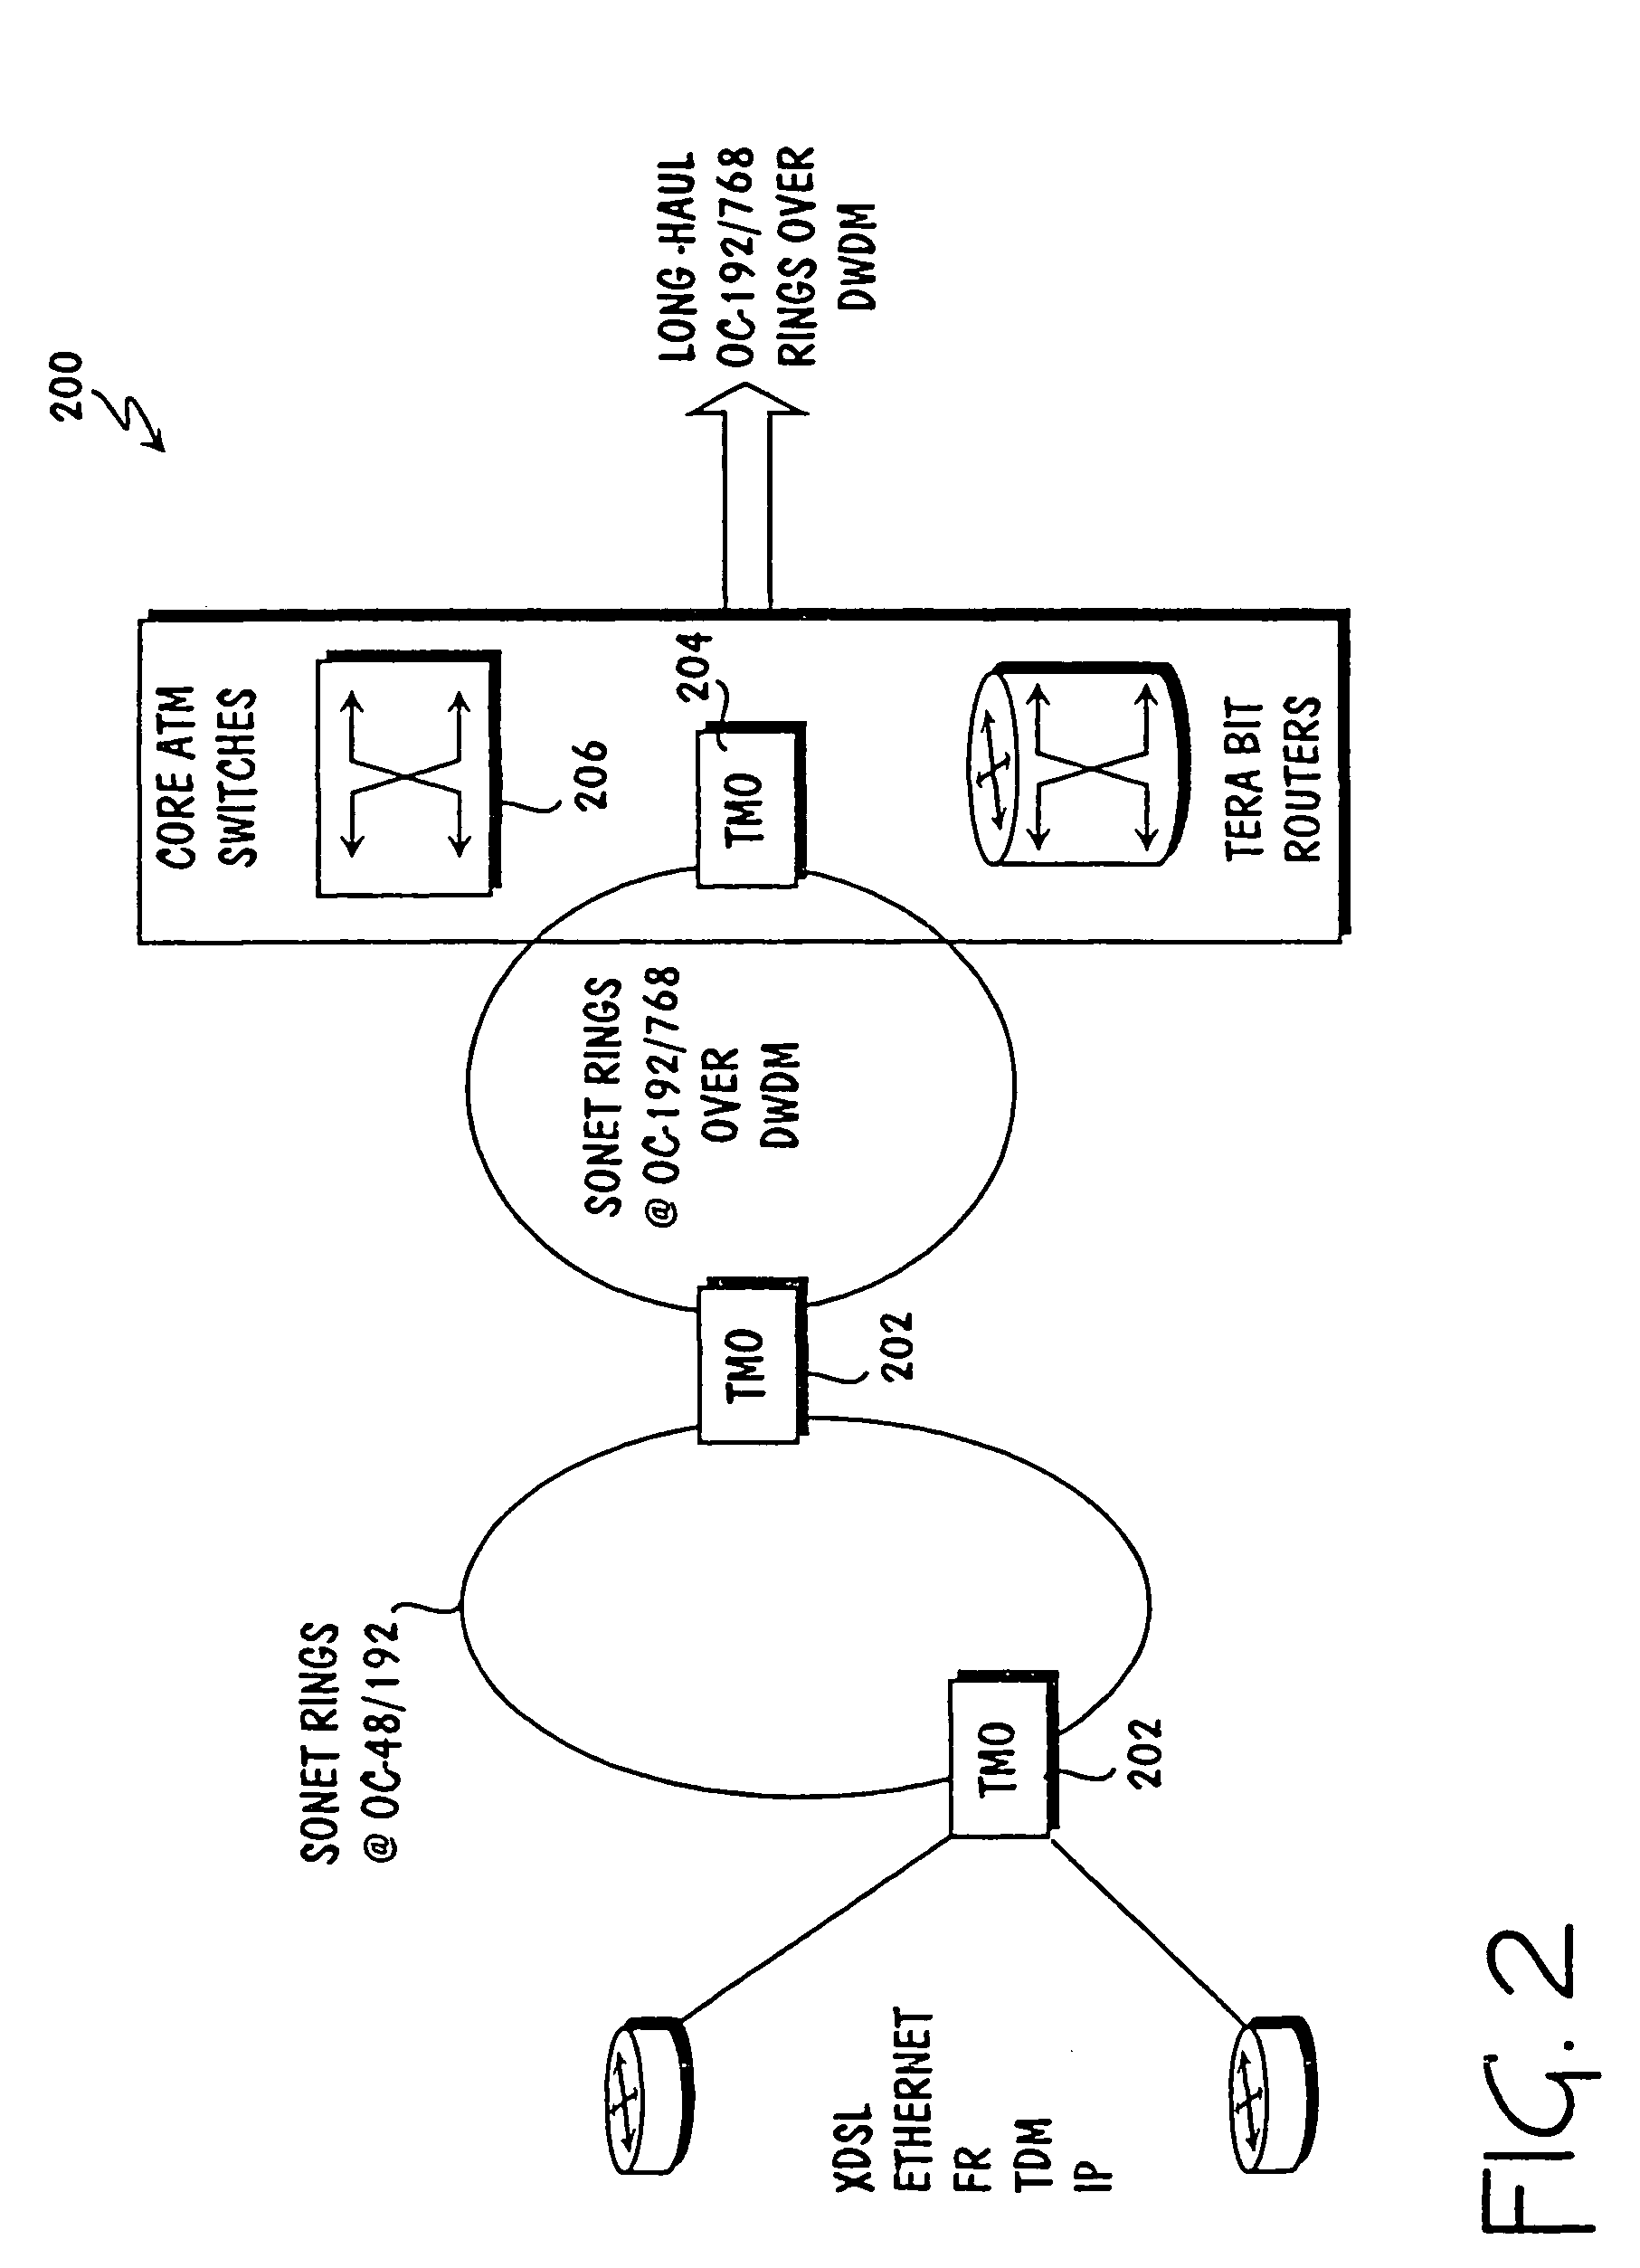 Interface transmitter for communications among network elements